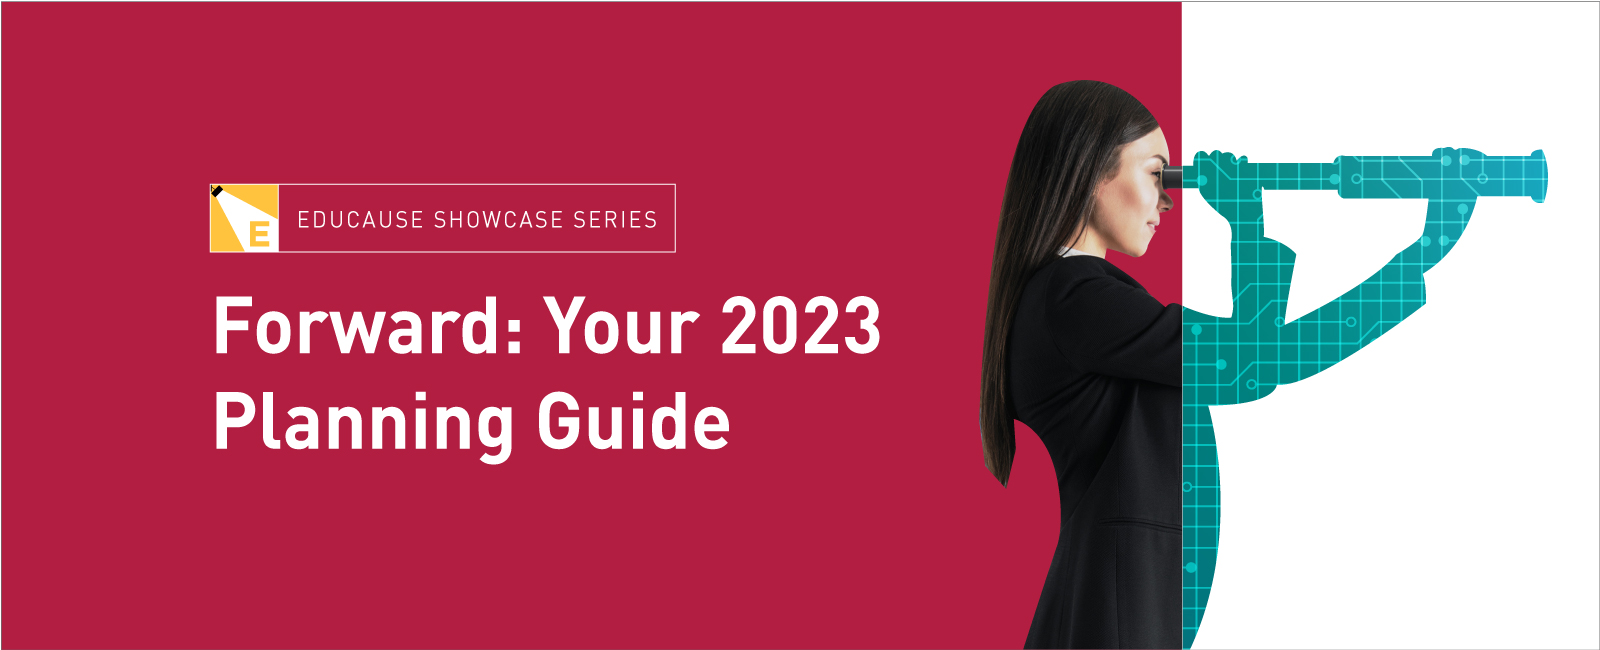 Forward: Your 2023 Planning Guide